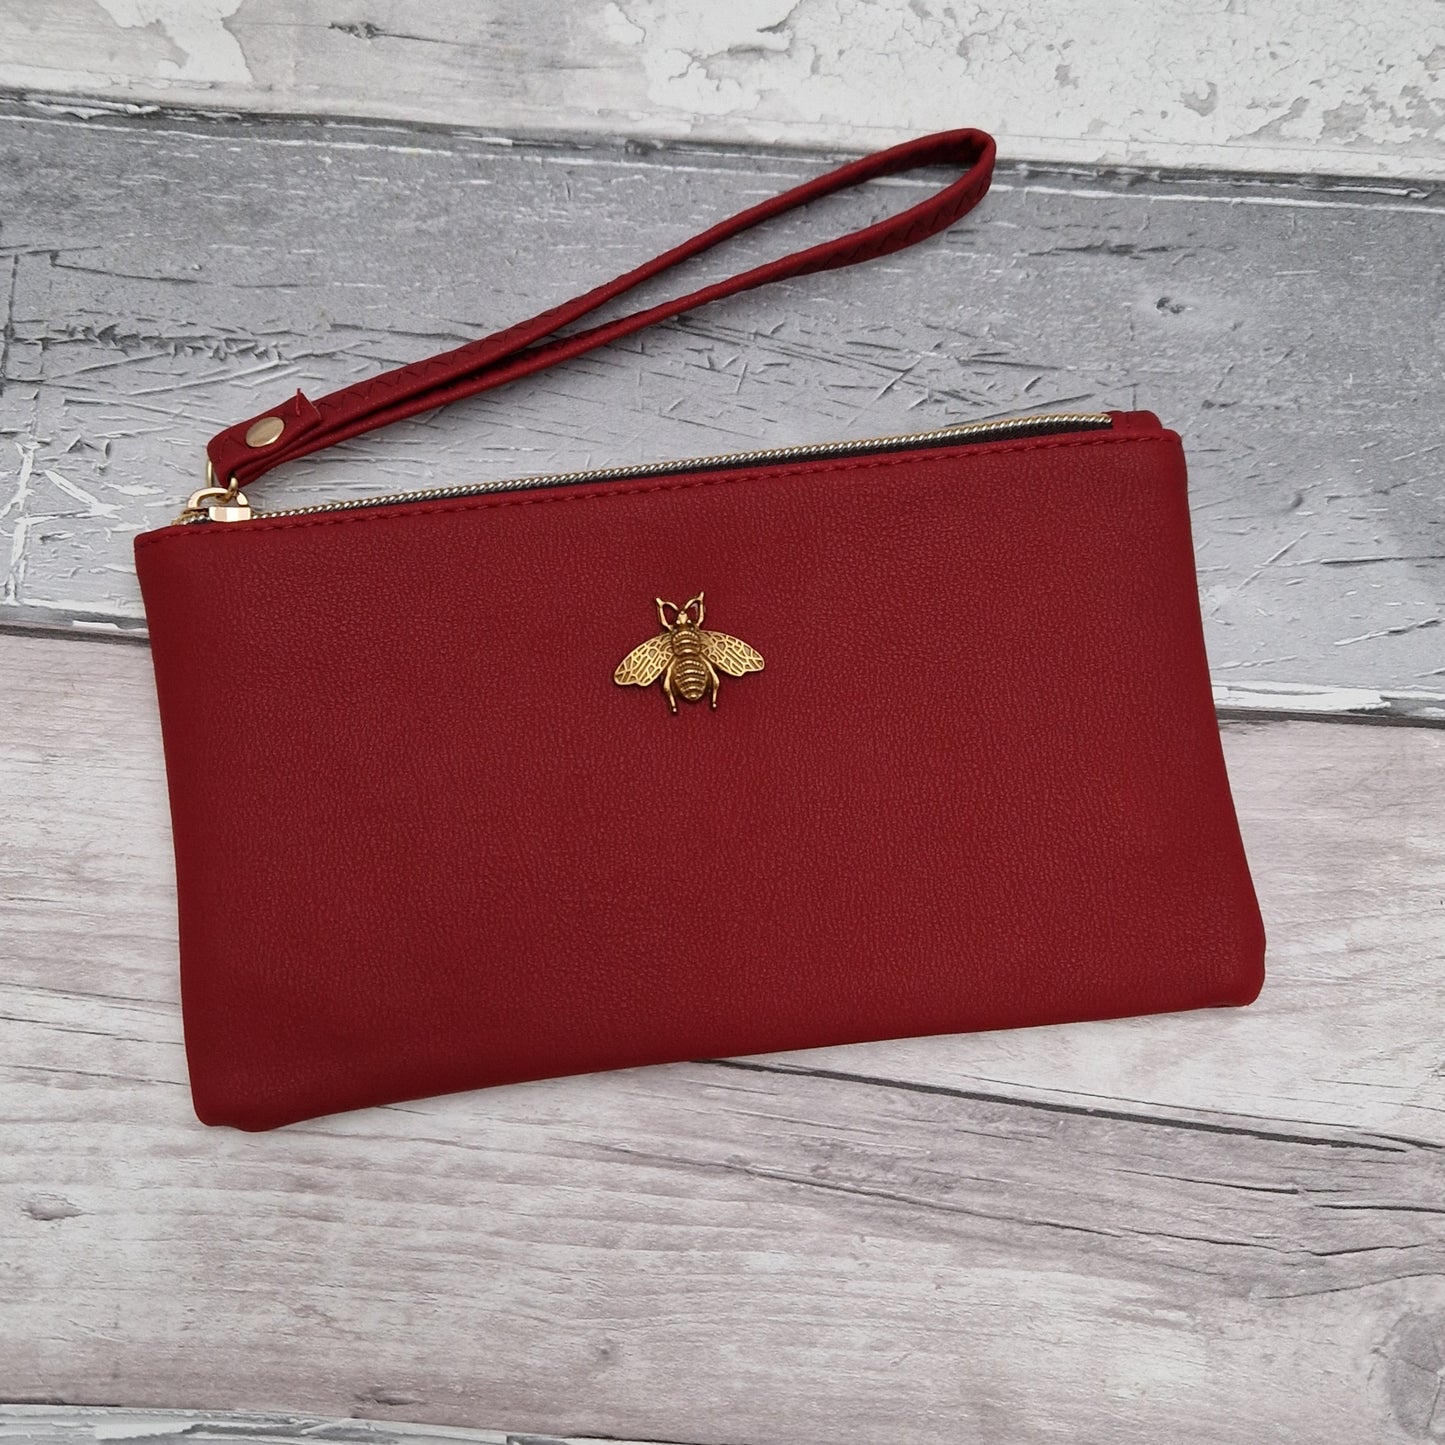 Red Clutch bag with a gold bee emblem.